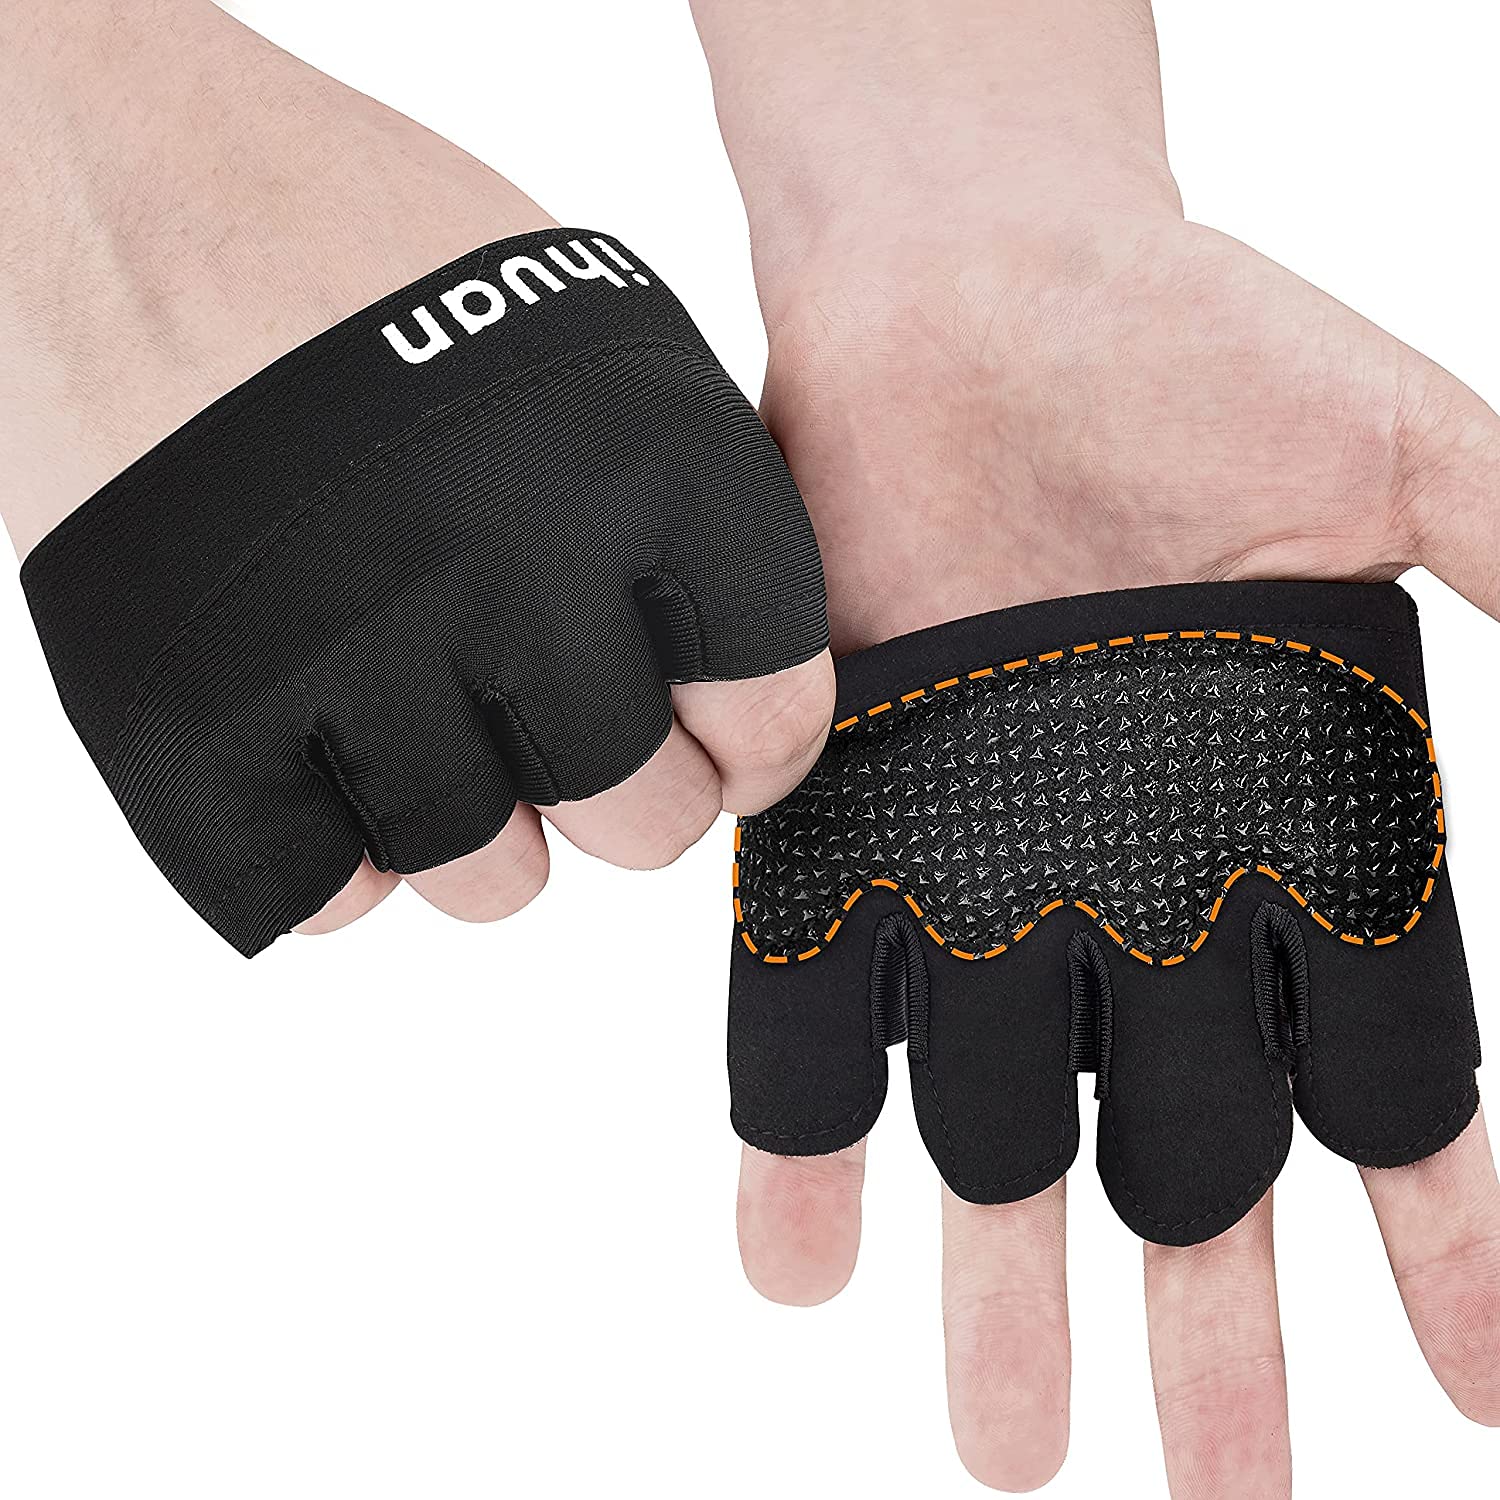 ihuan New Weight Lifting Gym Workout Gloves Men & Women, Partial Glove Just  for The Calluses Spots, Great for Weightlifting, Exercise, Training,  Fitness Black Small